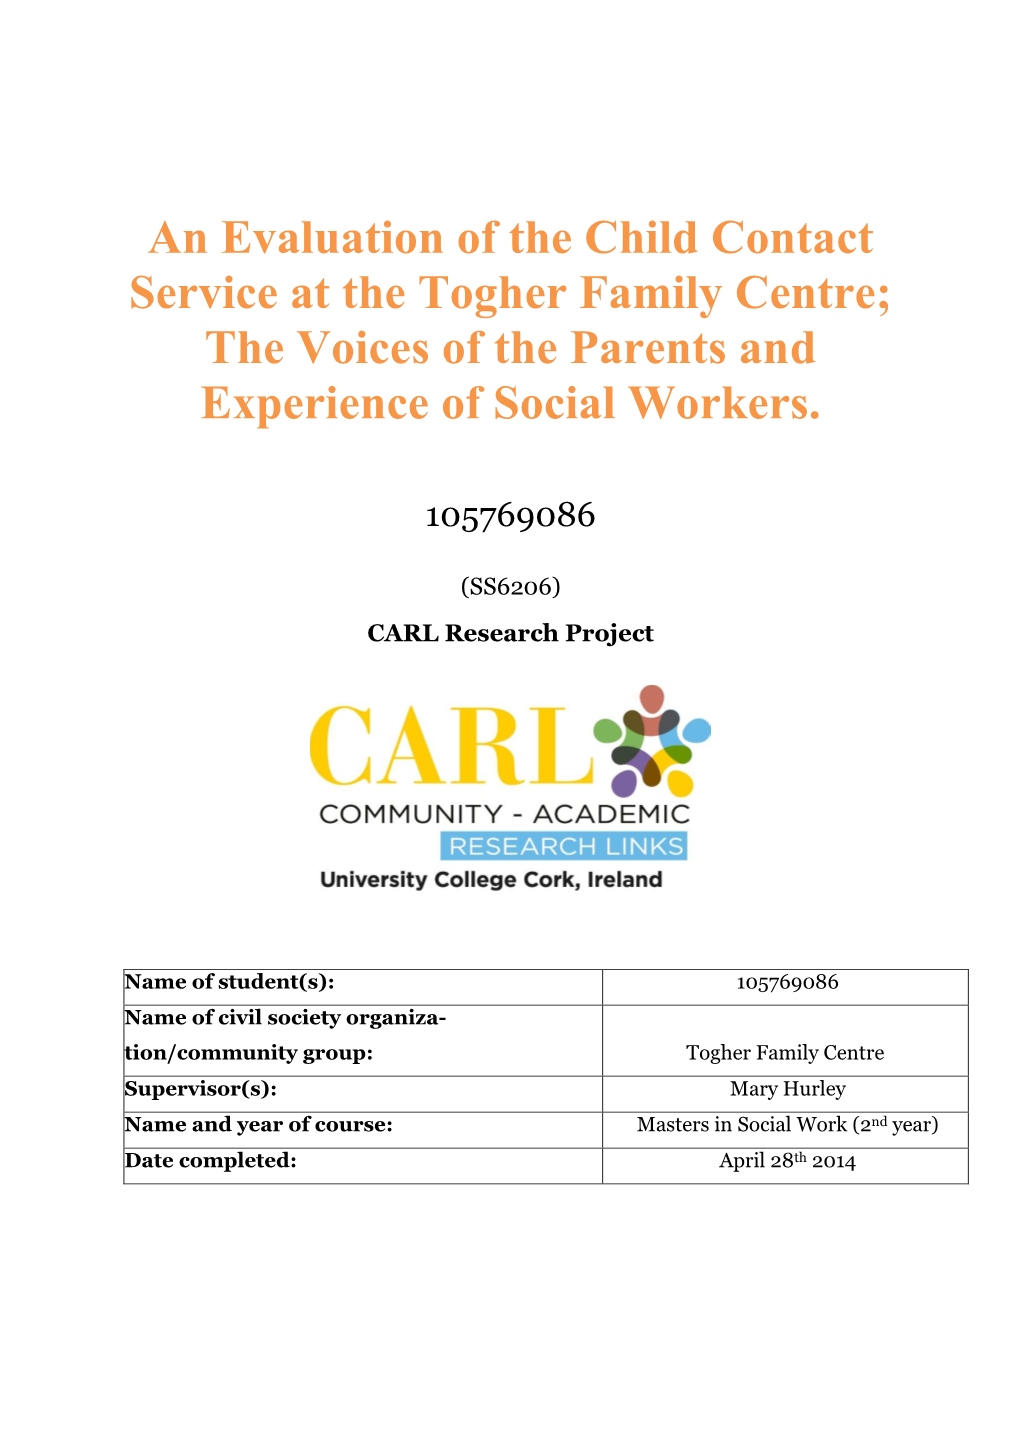 An Evaluation of the Child Contact Service at the Togher Family Centre; the Voices of the Parents and Experience of Social Workers